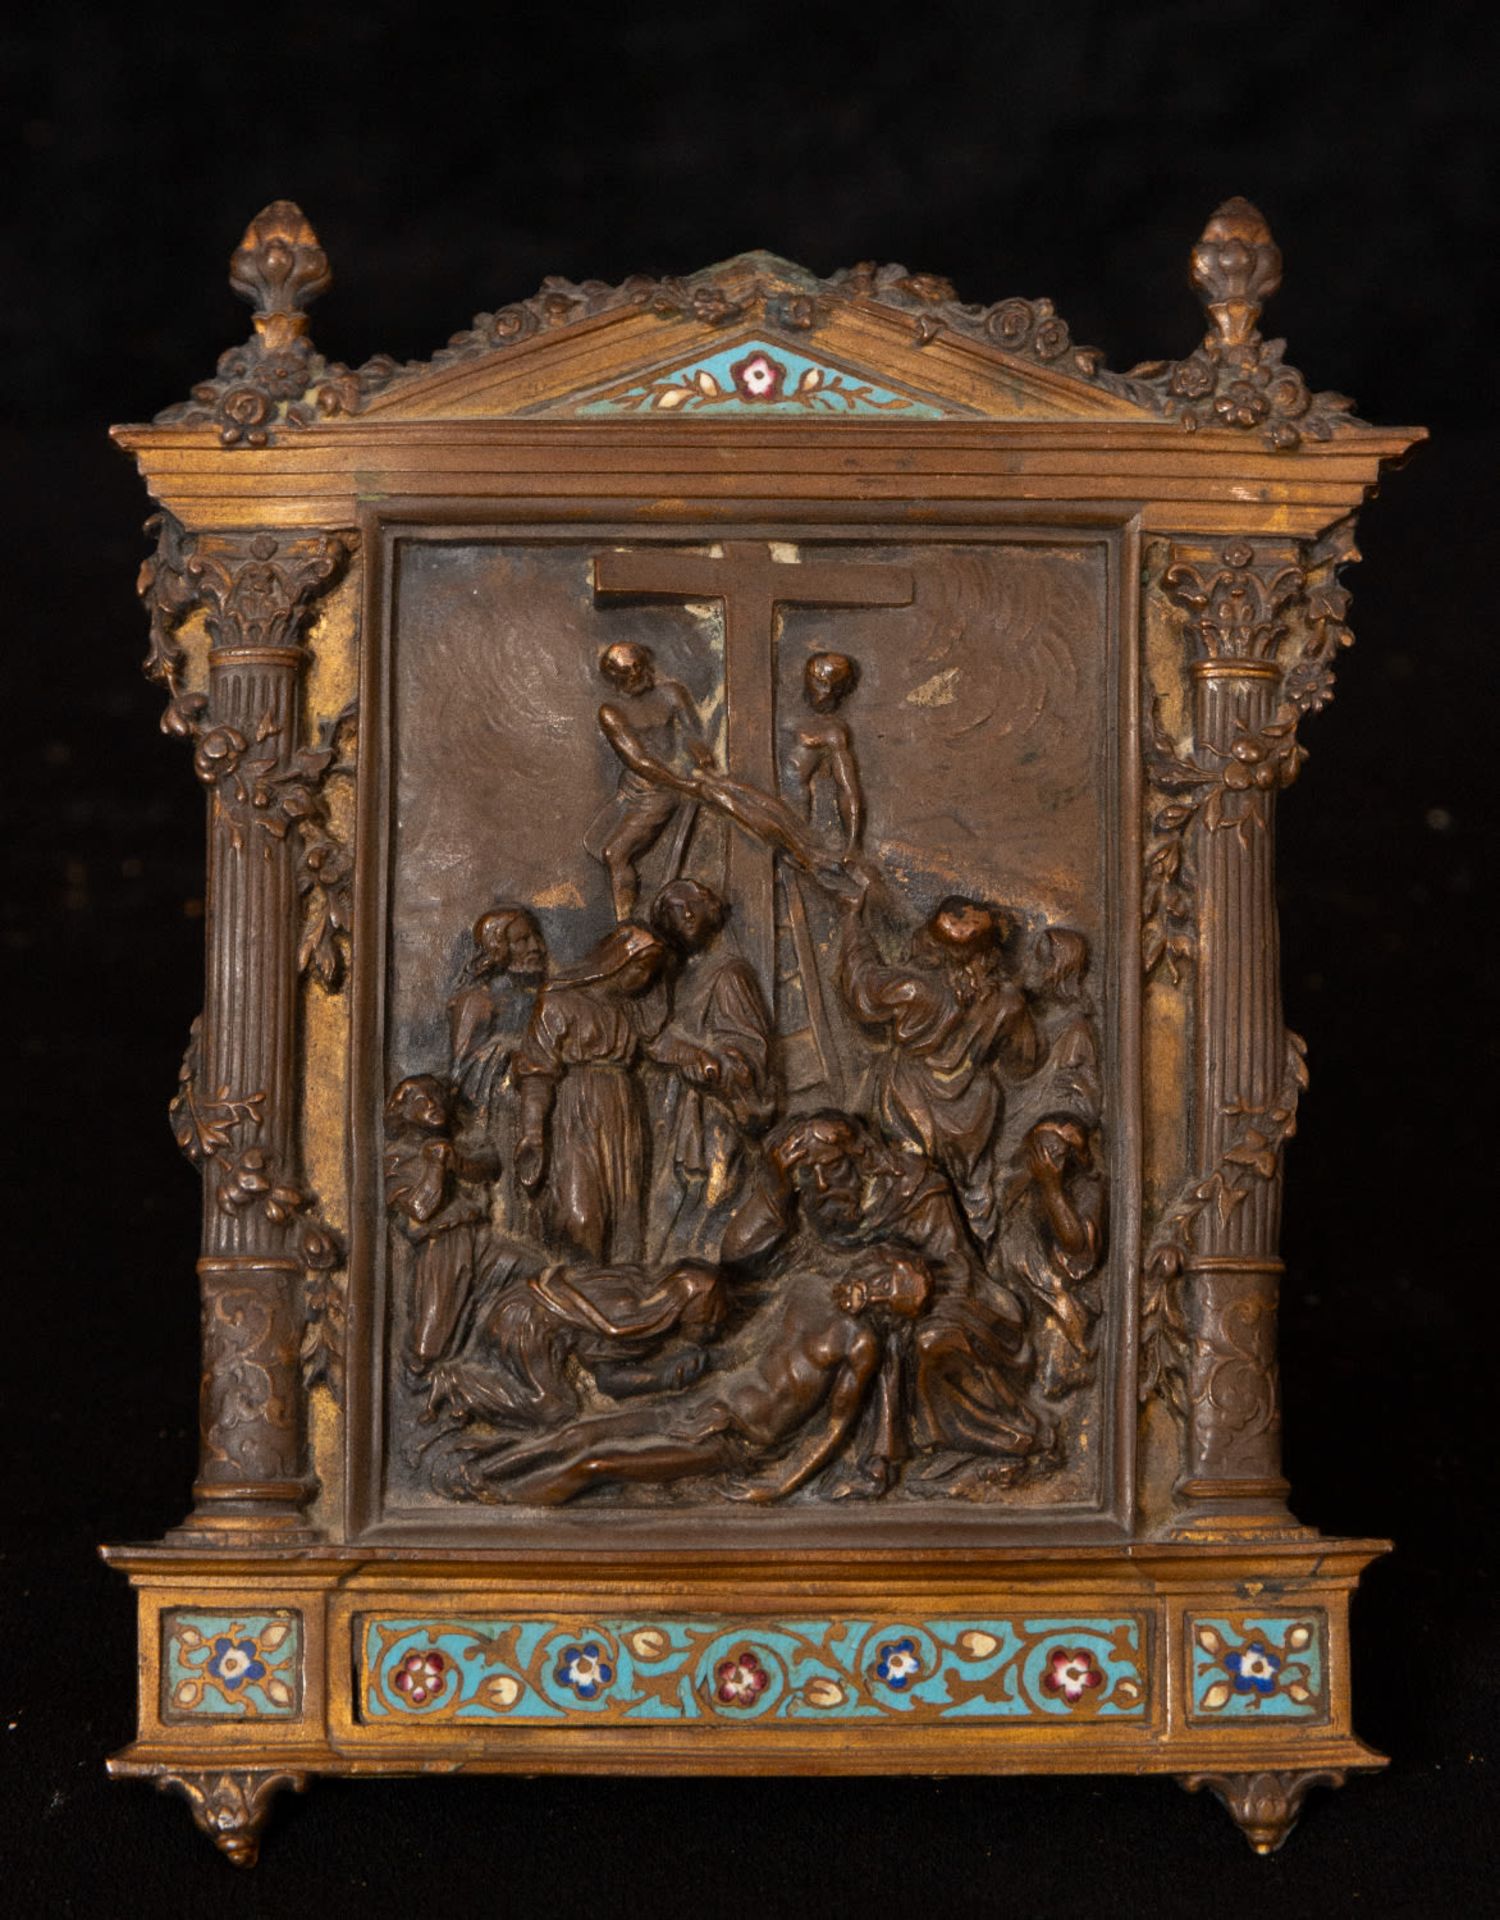 French relief in bronze and Limoges enamel, 19th - early 20th century